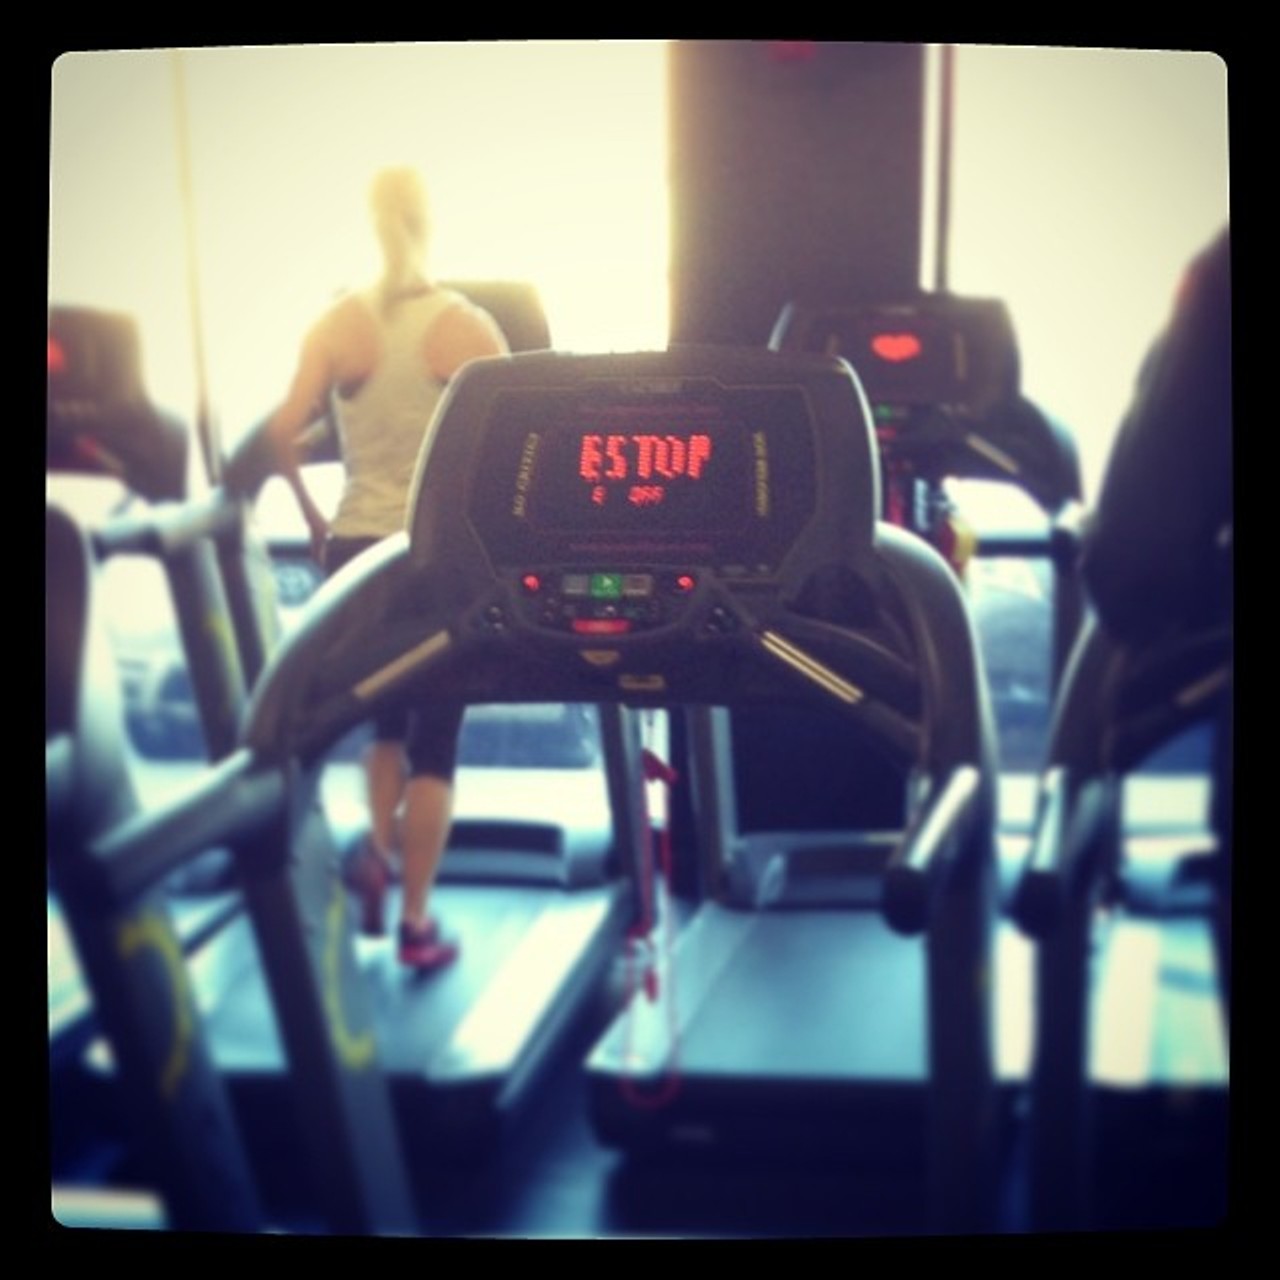 My friend sent me this picture while at the gym and the only thing I saw was ESTOP!
via @drk2022